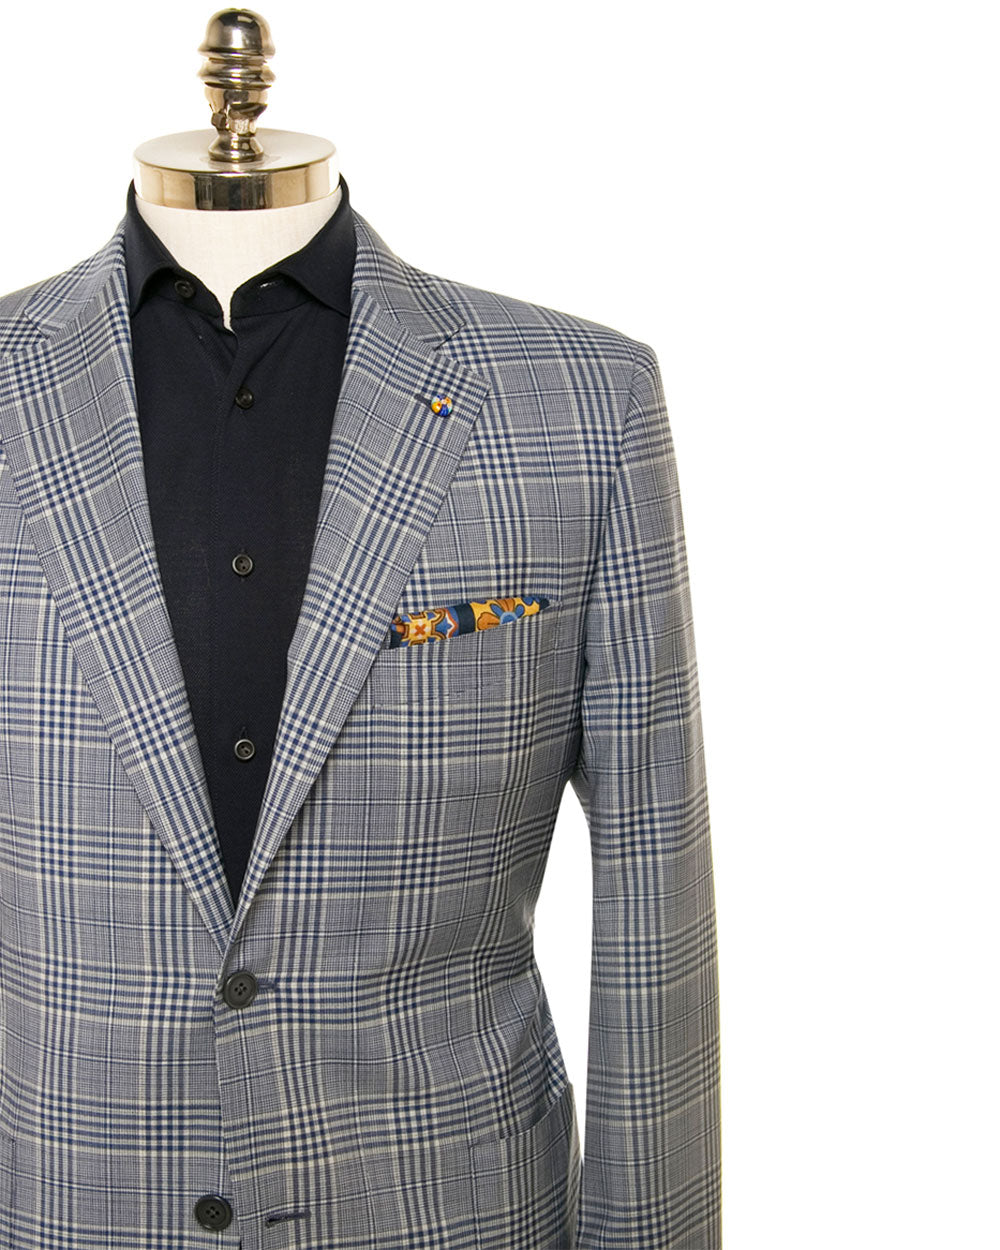 Navy and White Plaid Sportcoat